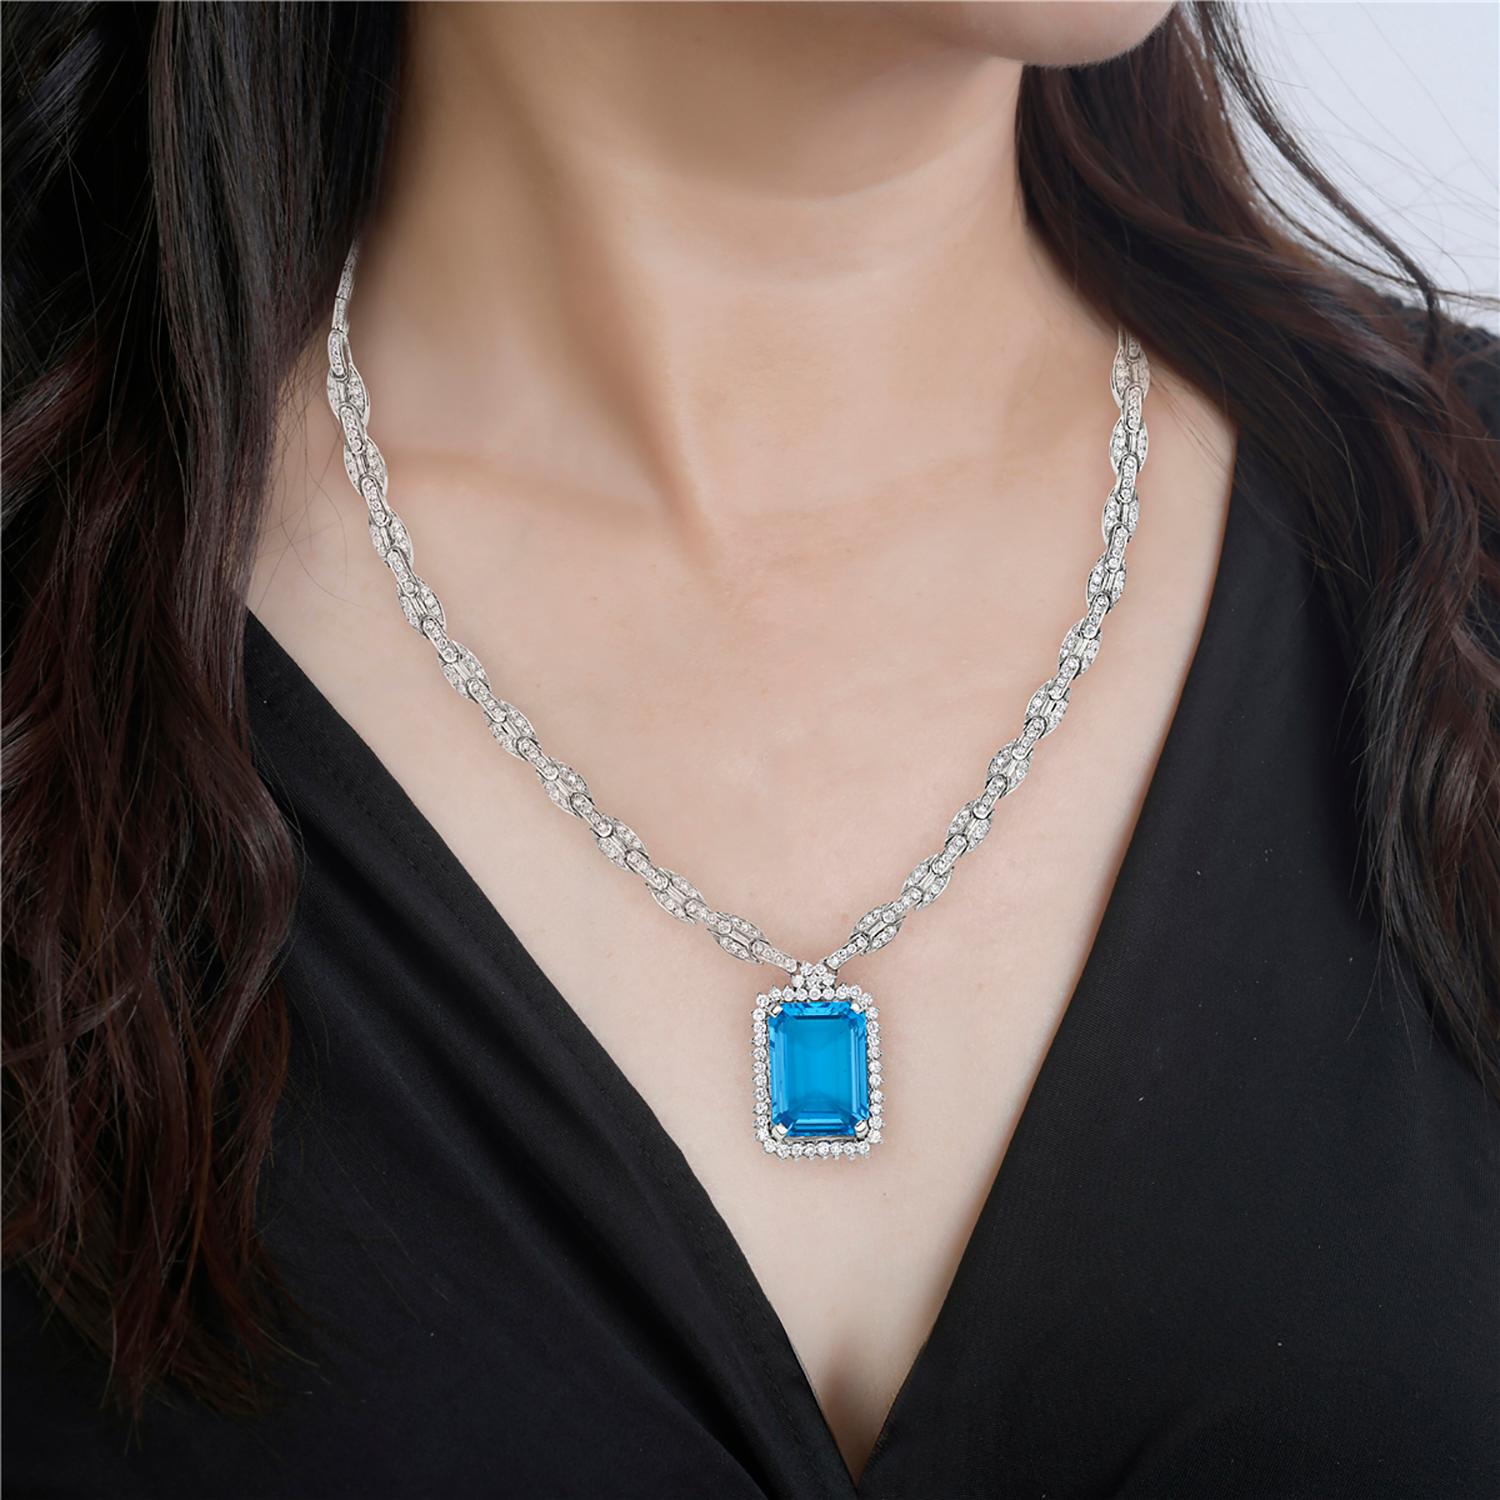 Elevate your look with this exquisite necklace, featuring a captivating cushion-cut blue topaz linked with a series of pave diamond-encrusted connectors, all set in luxurious 18k white gold. The bright and bold blue topaz is perfectly complemented